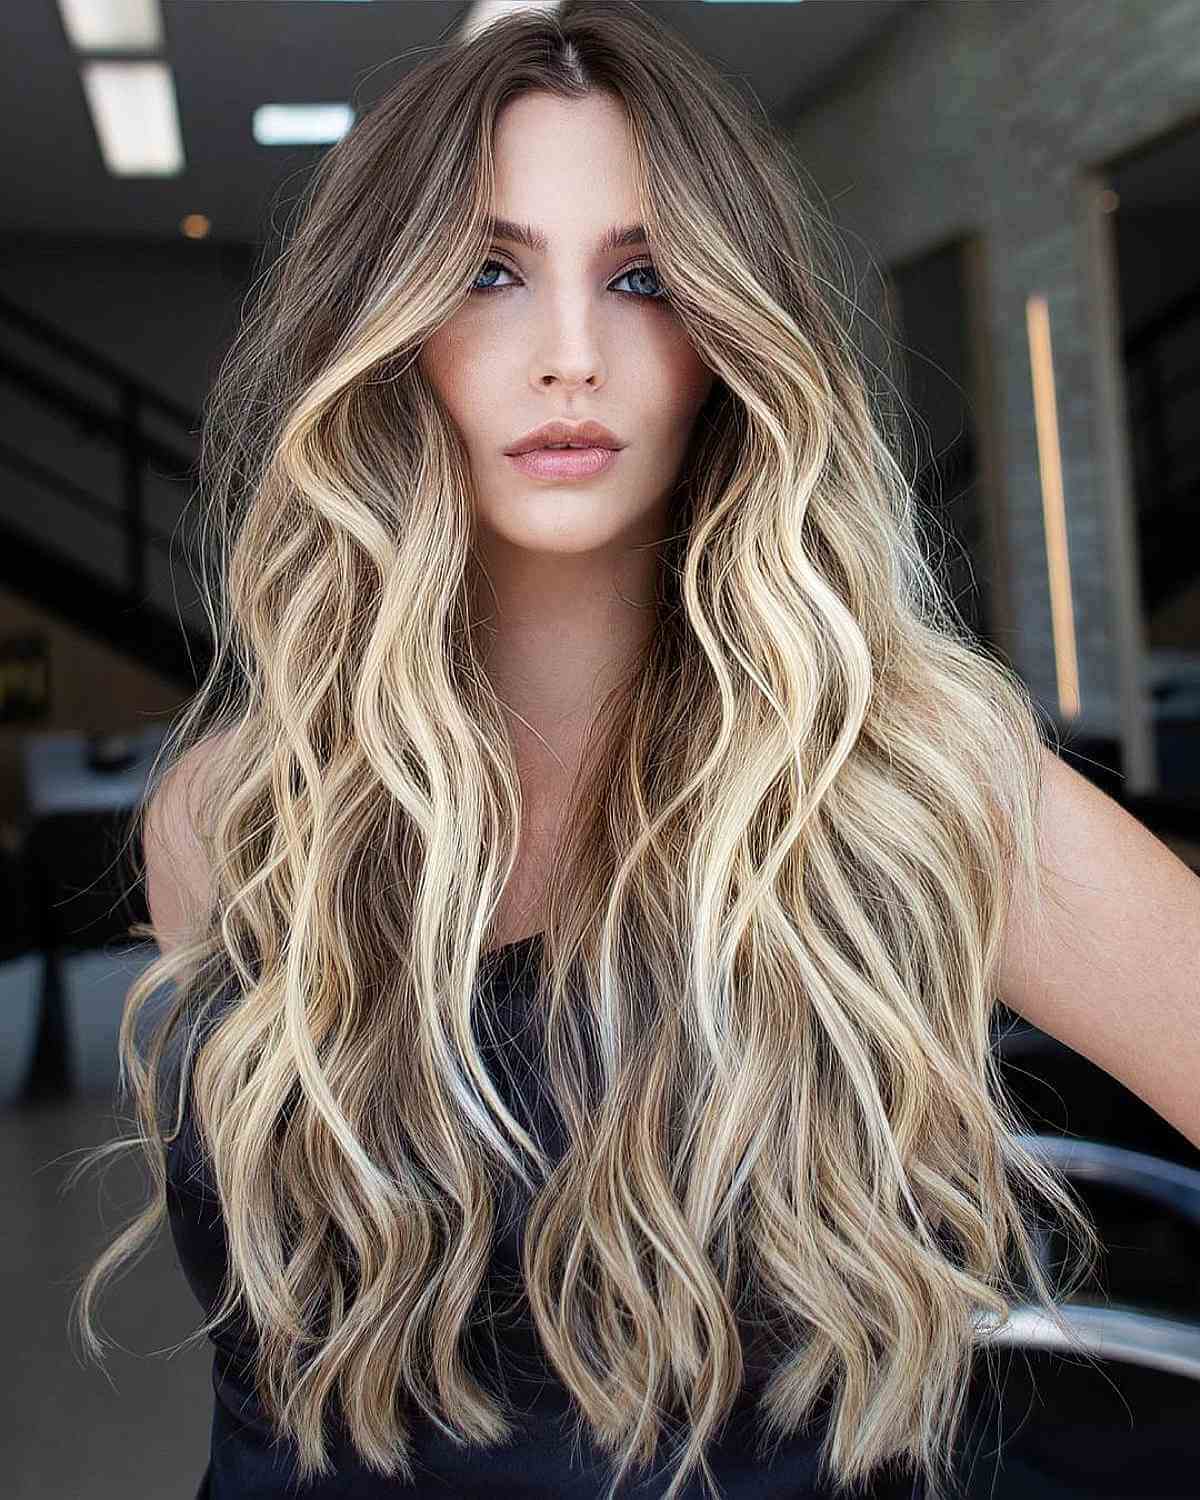 18 Beautiful Long Wavy Hairstyles with Bangs - Hairstyles Weekly